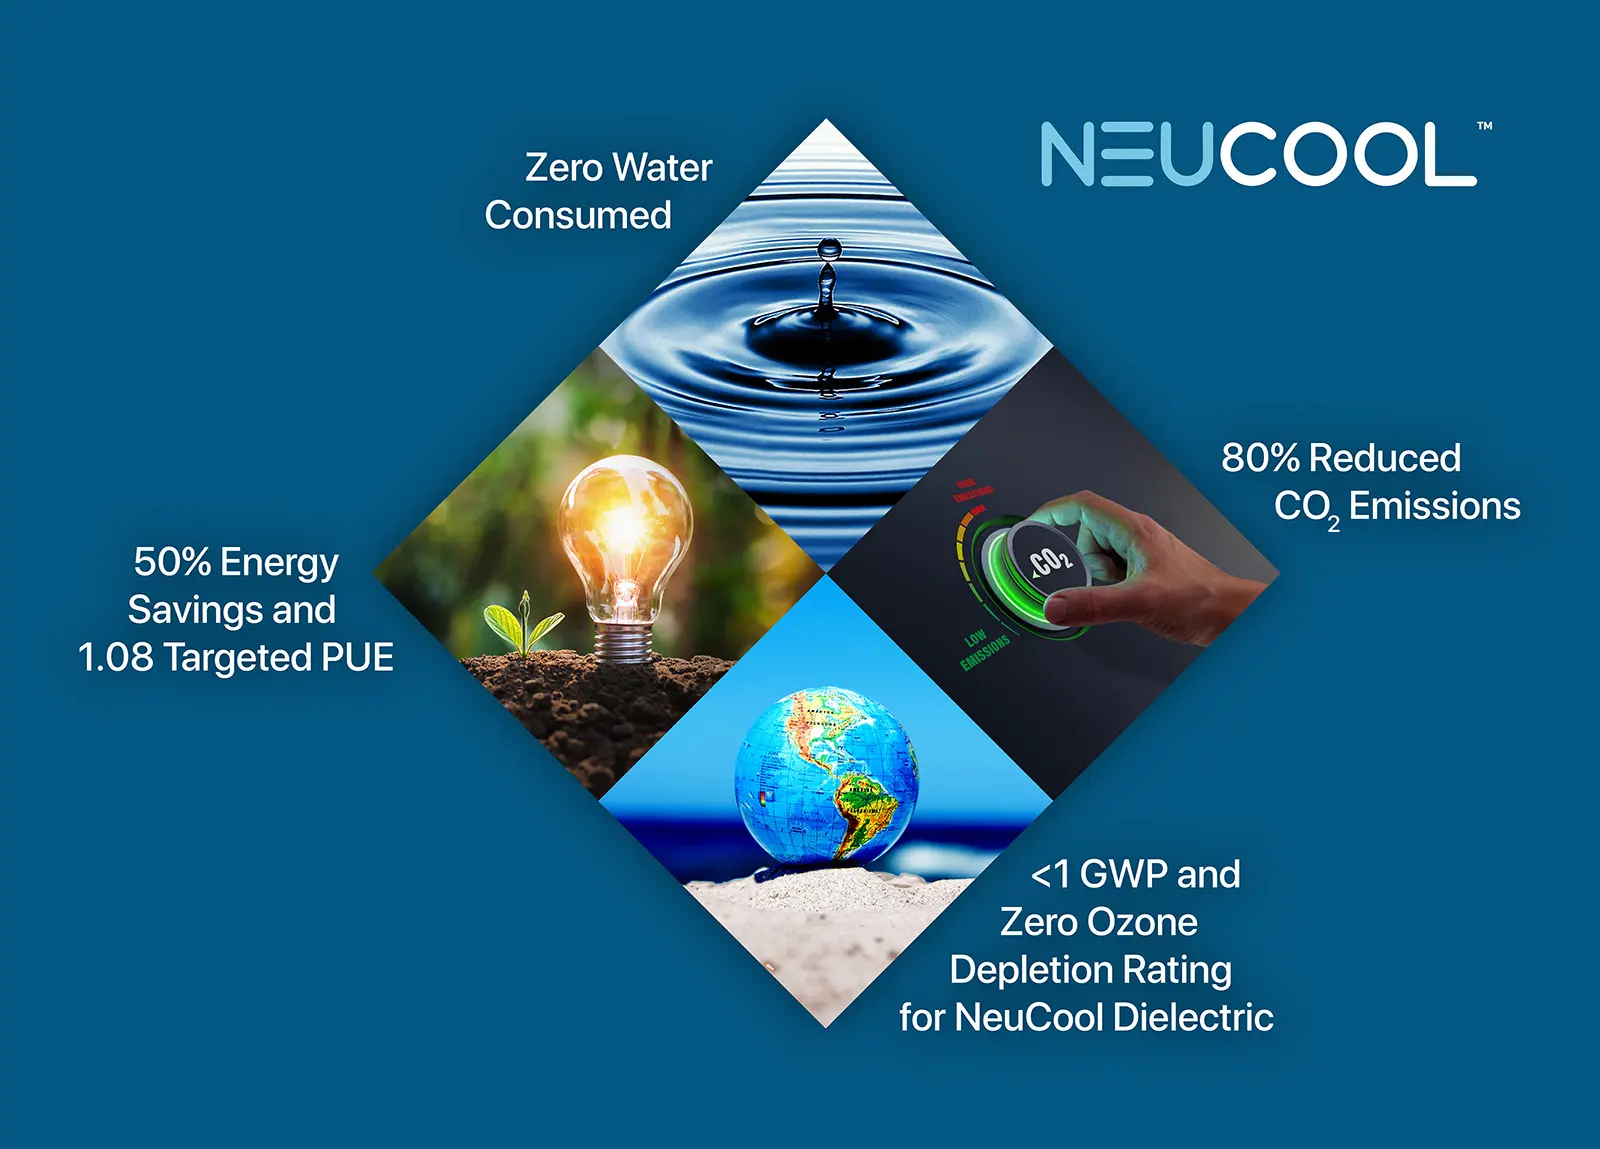 Customer sustainability graphic with images for energy saving, zero ozone depletion, CO2 reduction, and zero water consumed